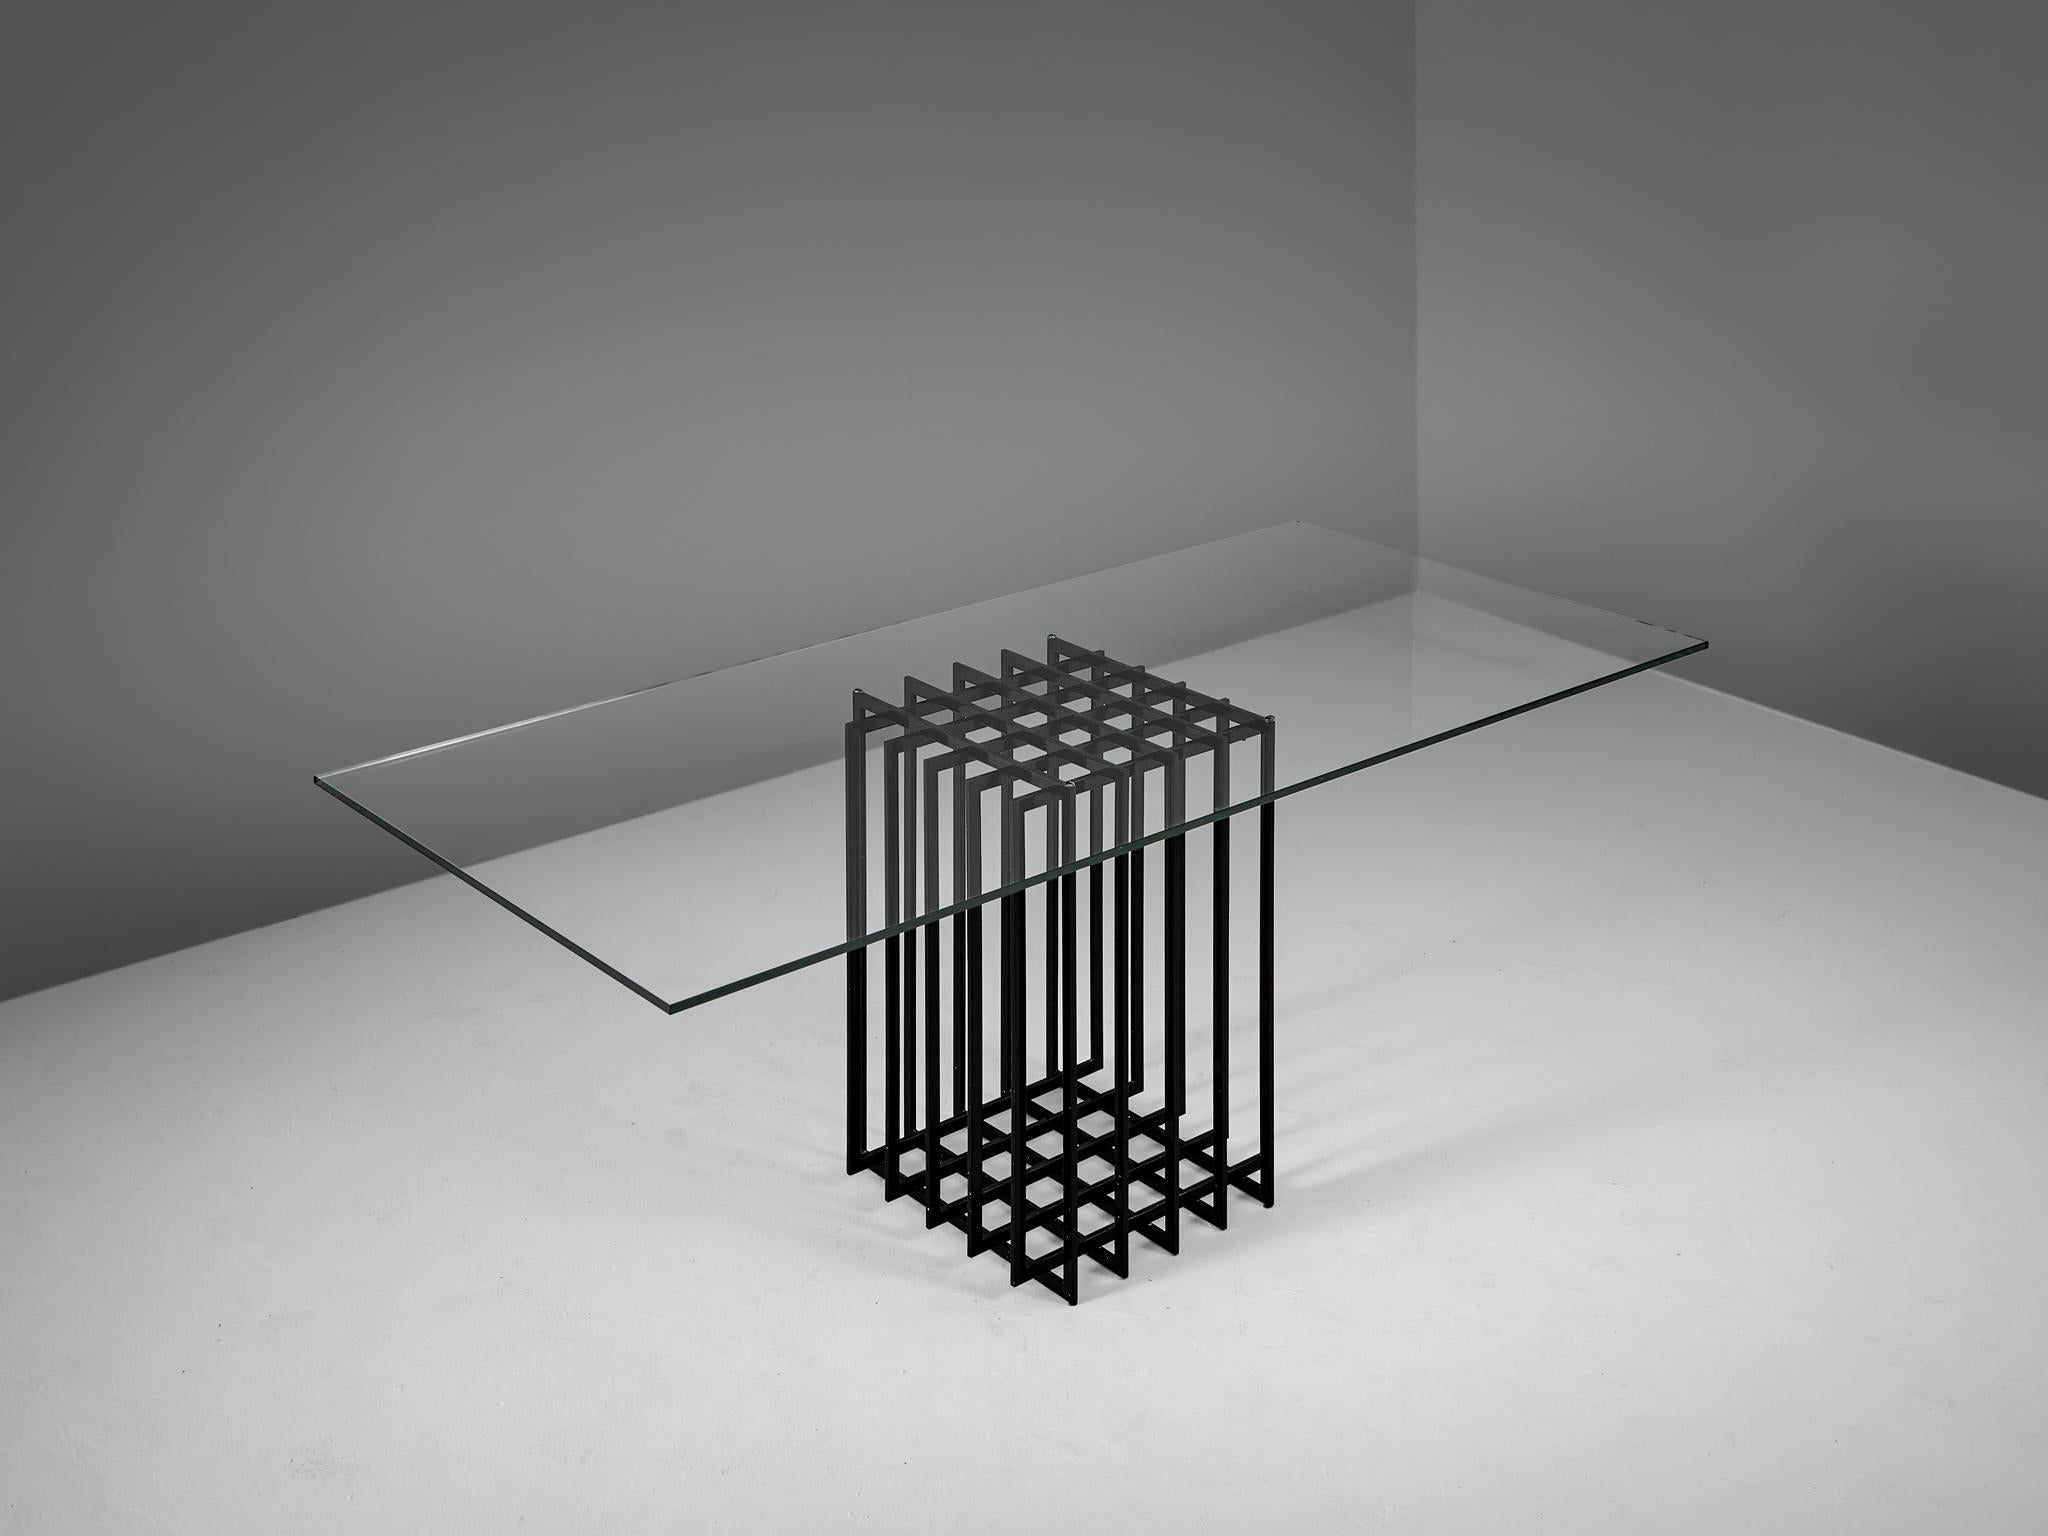 Table, in glass and metal, by Pierre Cardin, France, 1960s. 

Architectural writing or dining table by Pierre Cardin in black-coated steel. Due the use of a grid, the table features an elegant open expression. The clear glass top beautifully